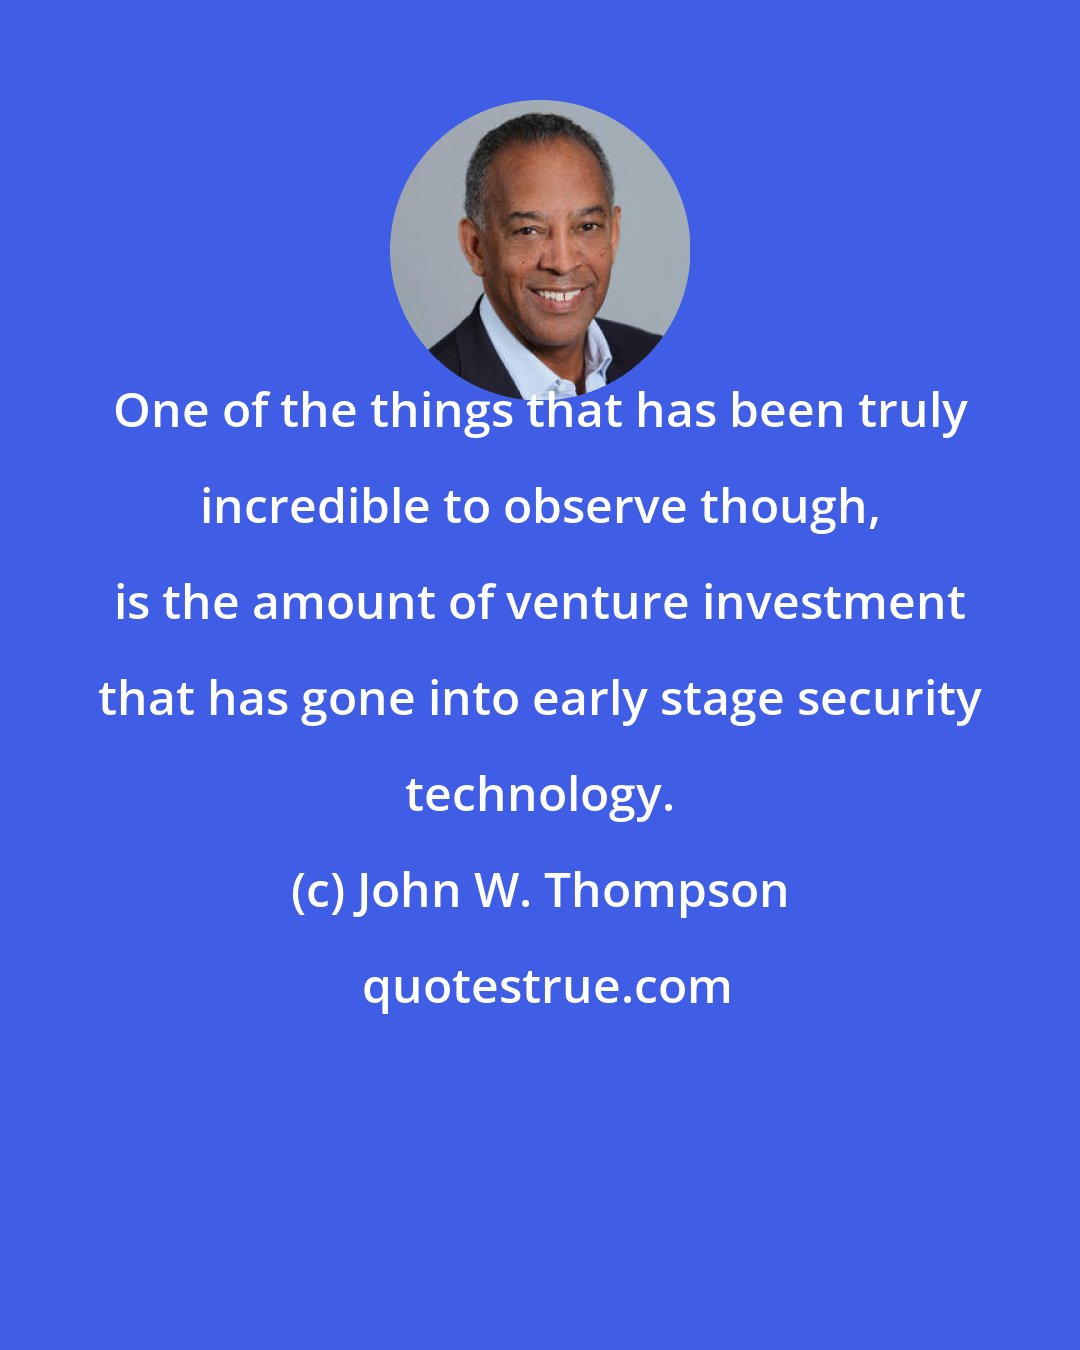 John W. Thompson: One of the things that has been truly incredible to observe though, is the amount of venture investment that has gone into early stage security technology.